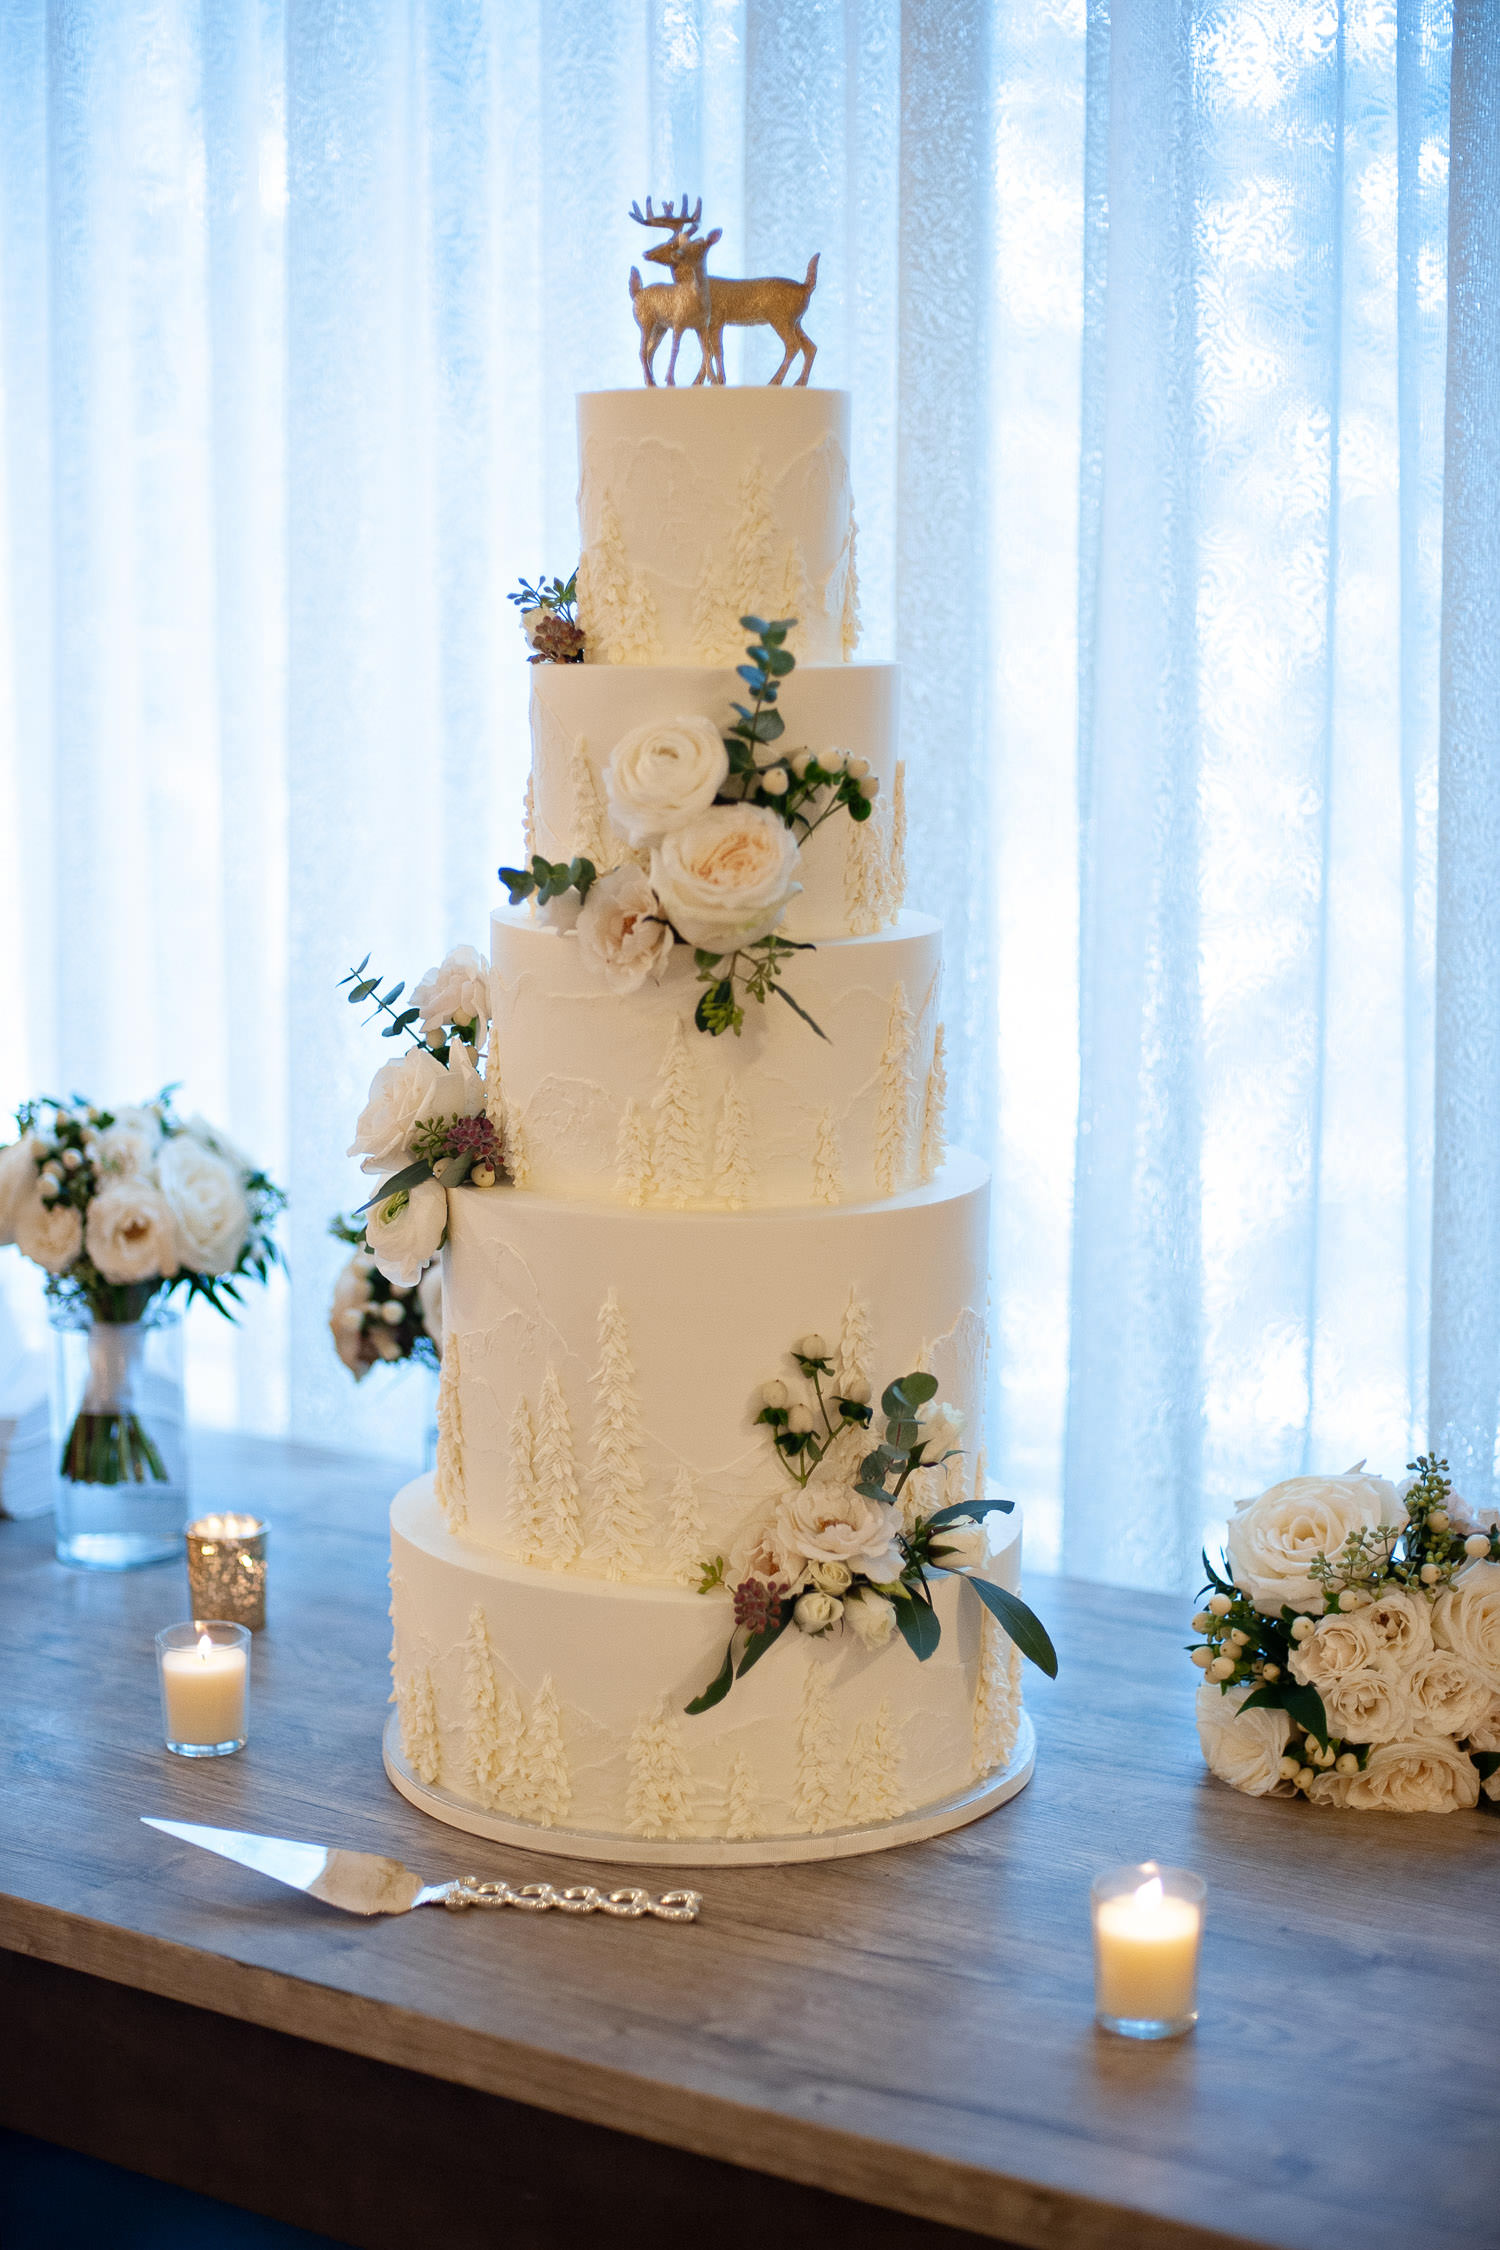 Wedding cake from Kakes by Darci at the Banff Springs Hotel captured by Tara Whittaker Photography